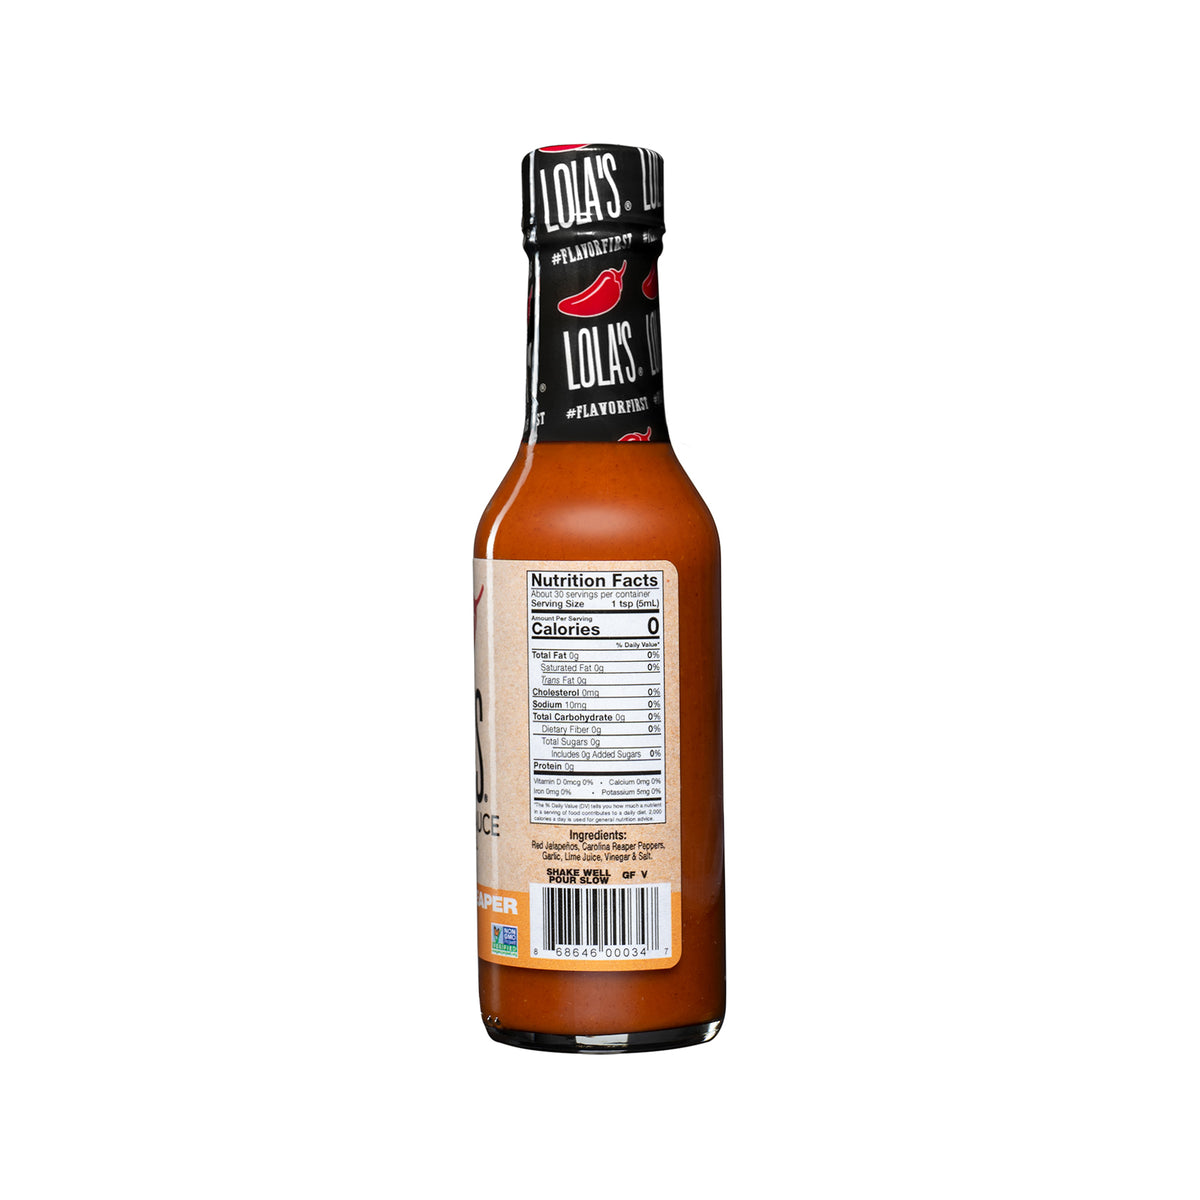 A bottle of Lola's Carolina Reaper Hot Sauce, featuring a close-up of the nutrition label and a bar code. Perfect for pizza, meal prep, or pasta!